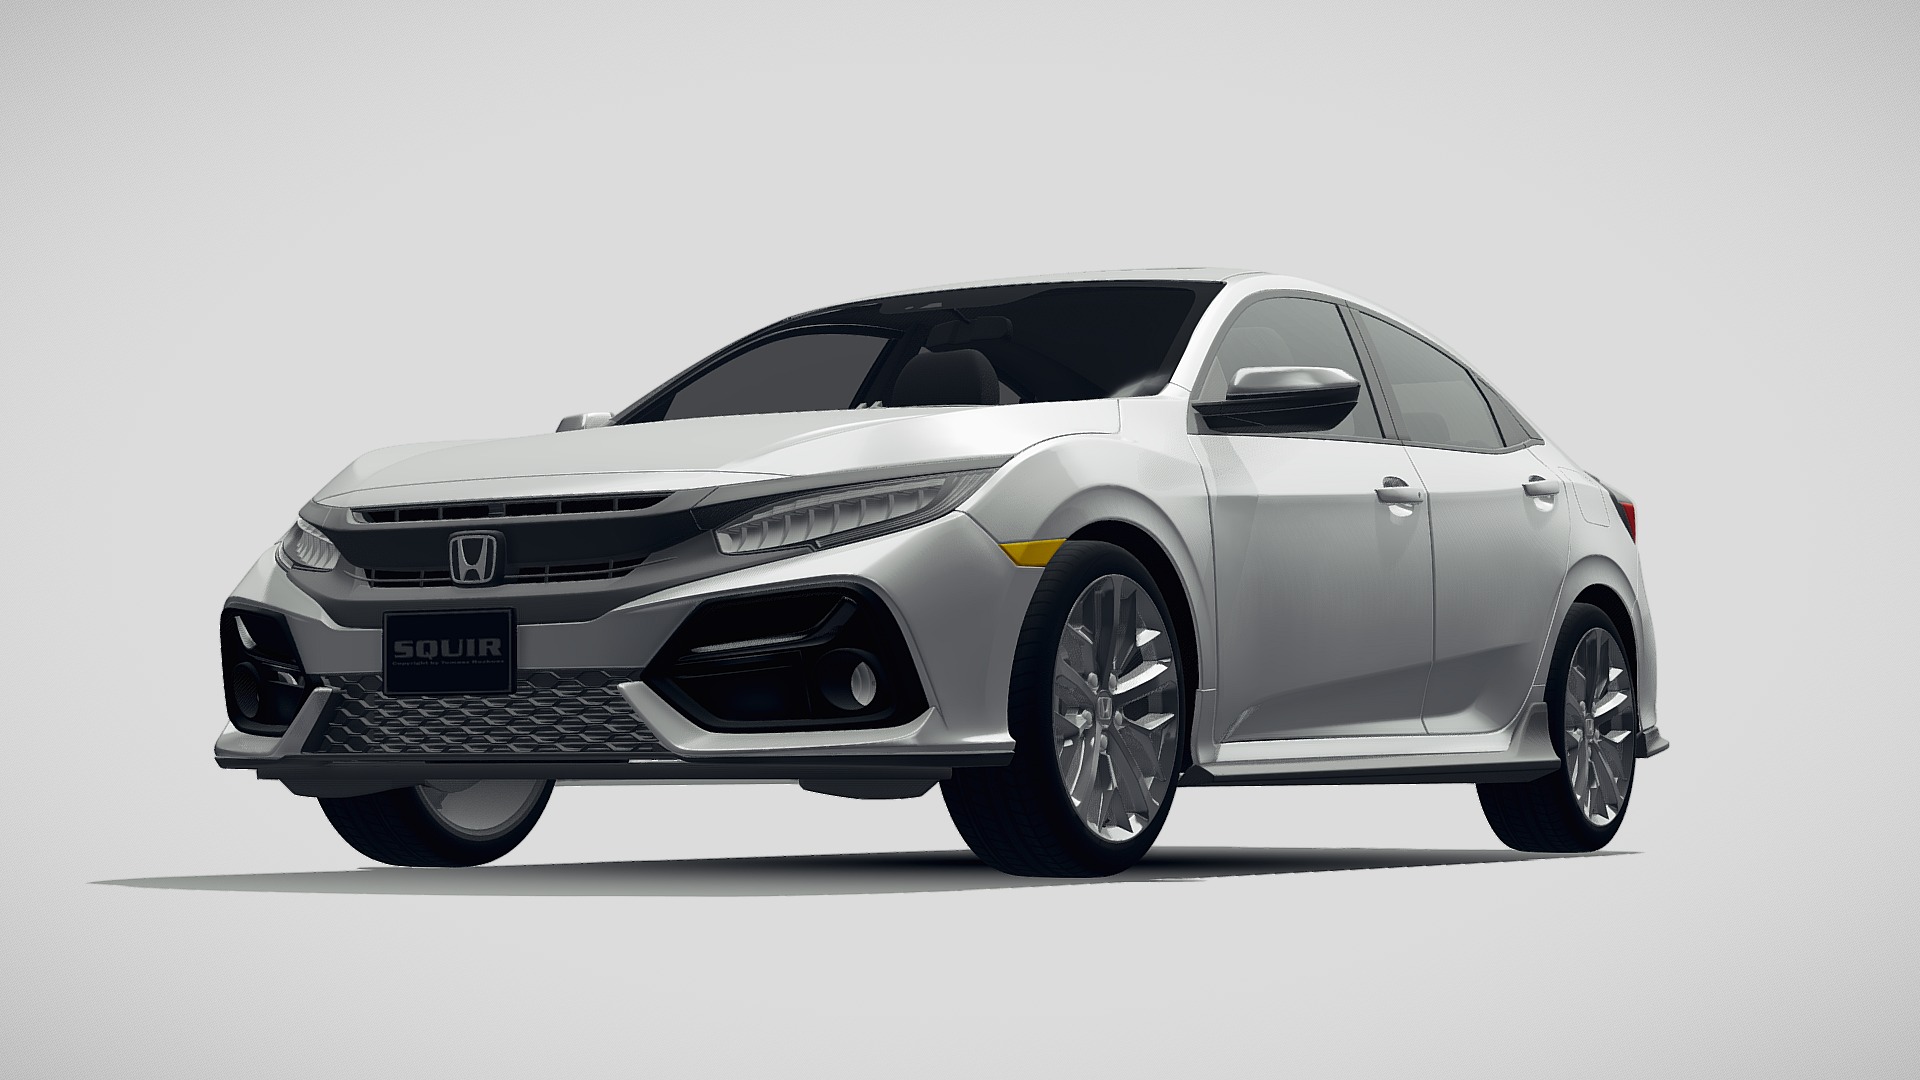 3D model Honda Civic Hatchback 2020 - This is a 3D model of the Honda Civic Hatchback 2020. The 3D model is about a silver car with a black top with Holden Arboretum in the background.